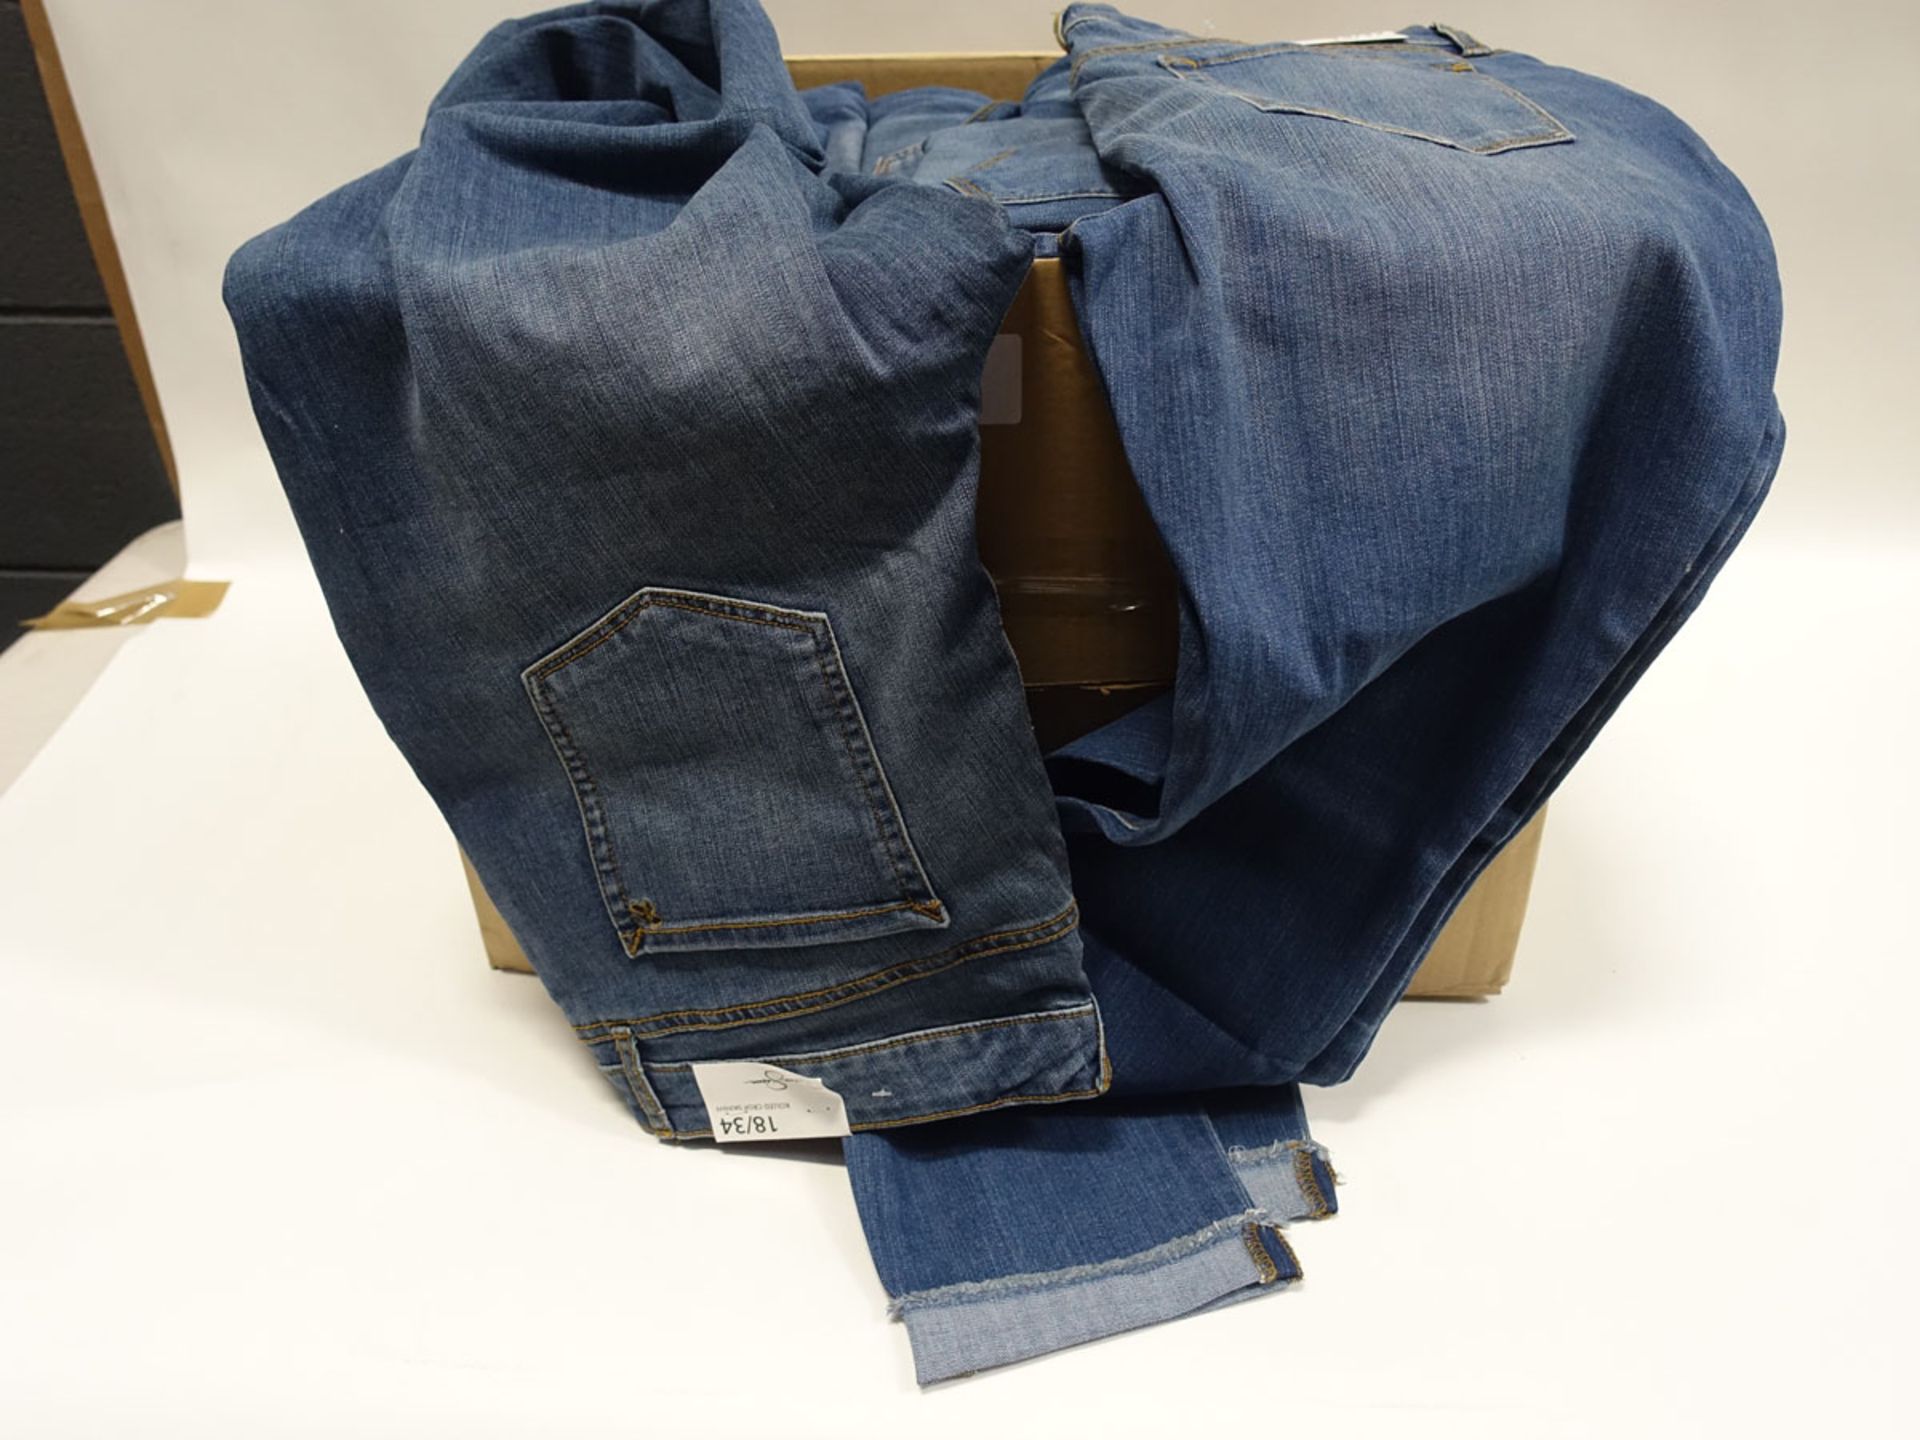 Box containing approx 40 pairs of Jessica Simpson roll crop skinny denim jeans (various sizes)